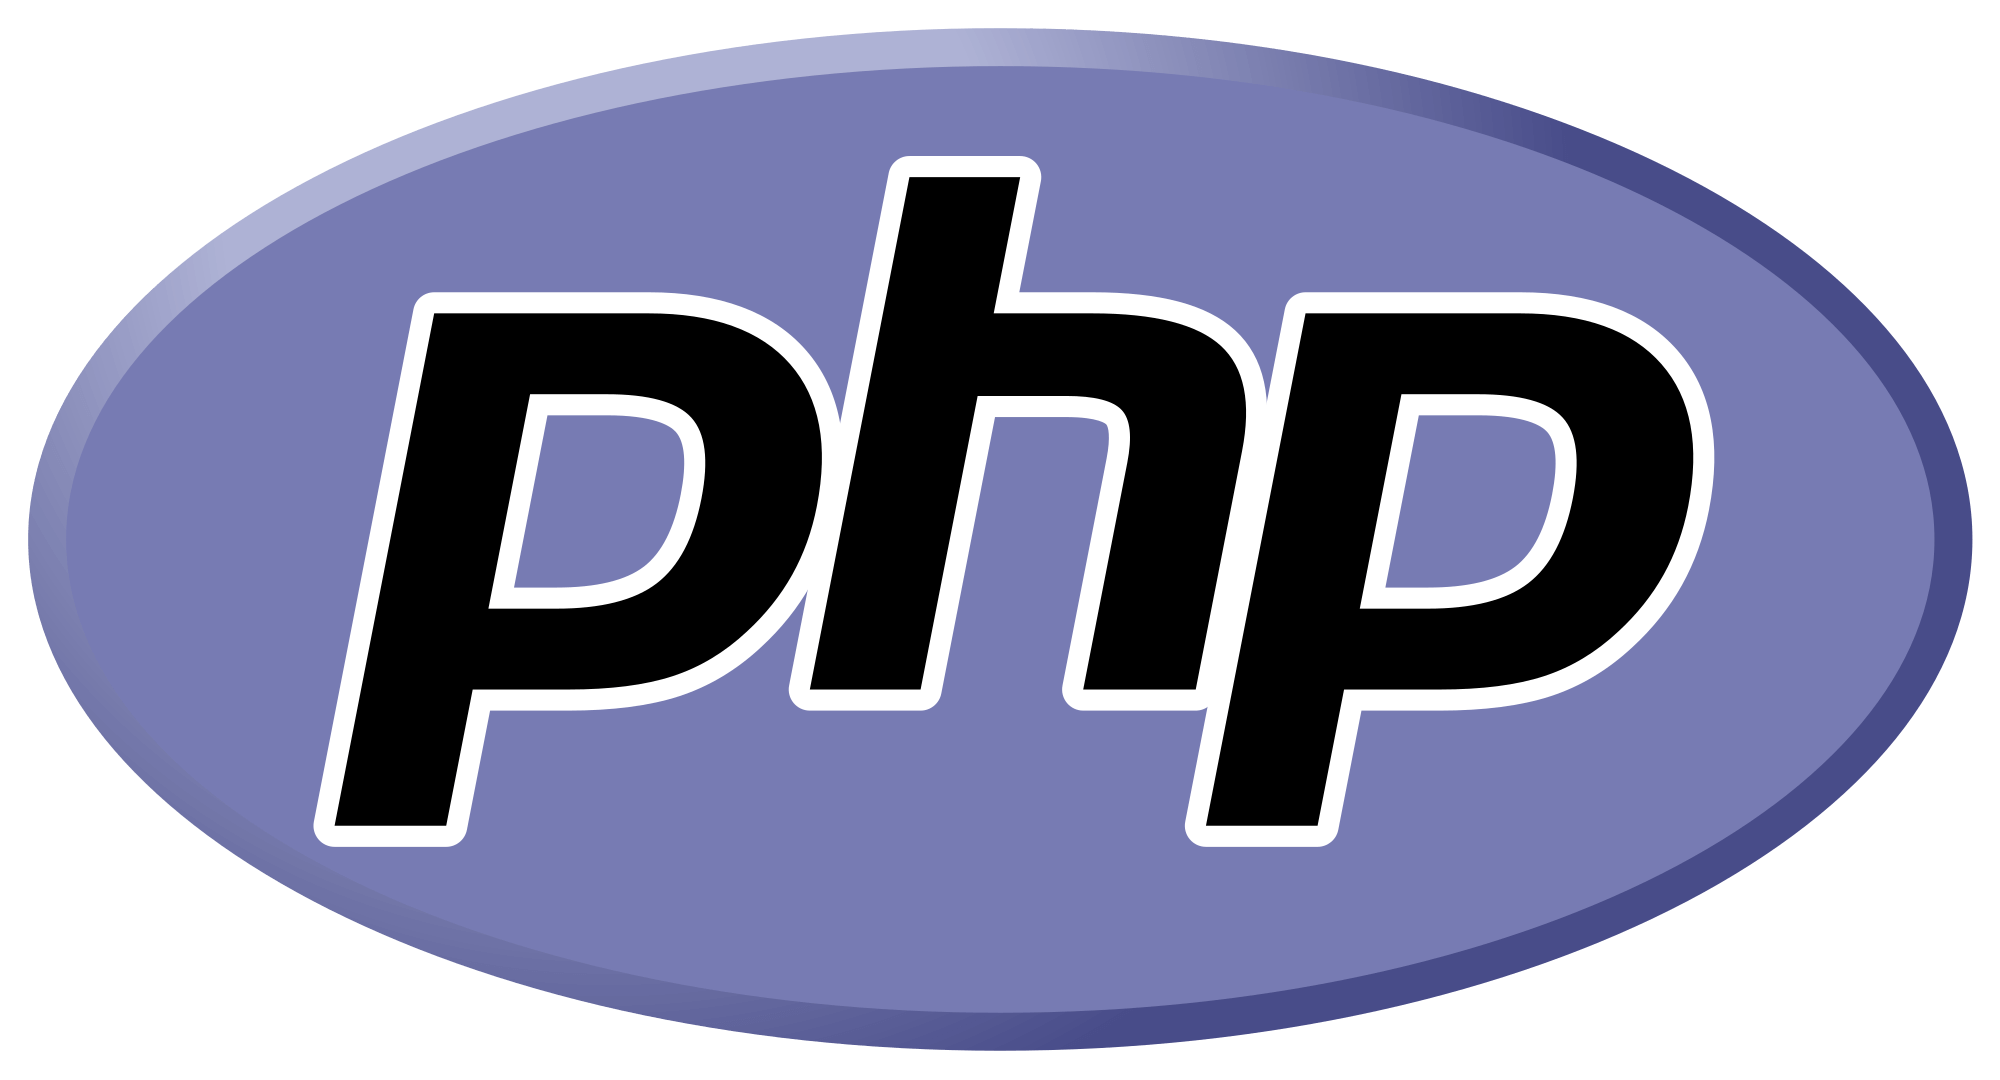 Webmingo | Openings for Php Developer